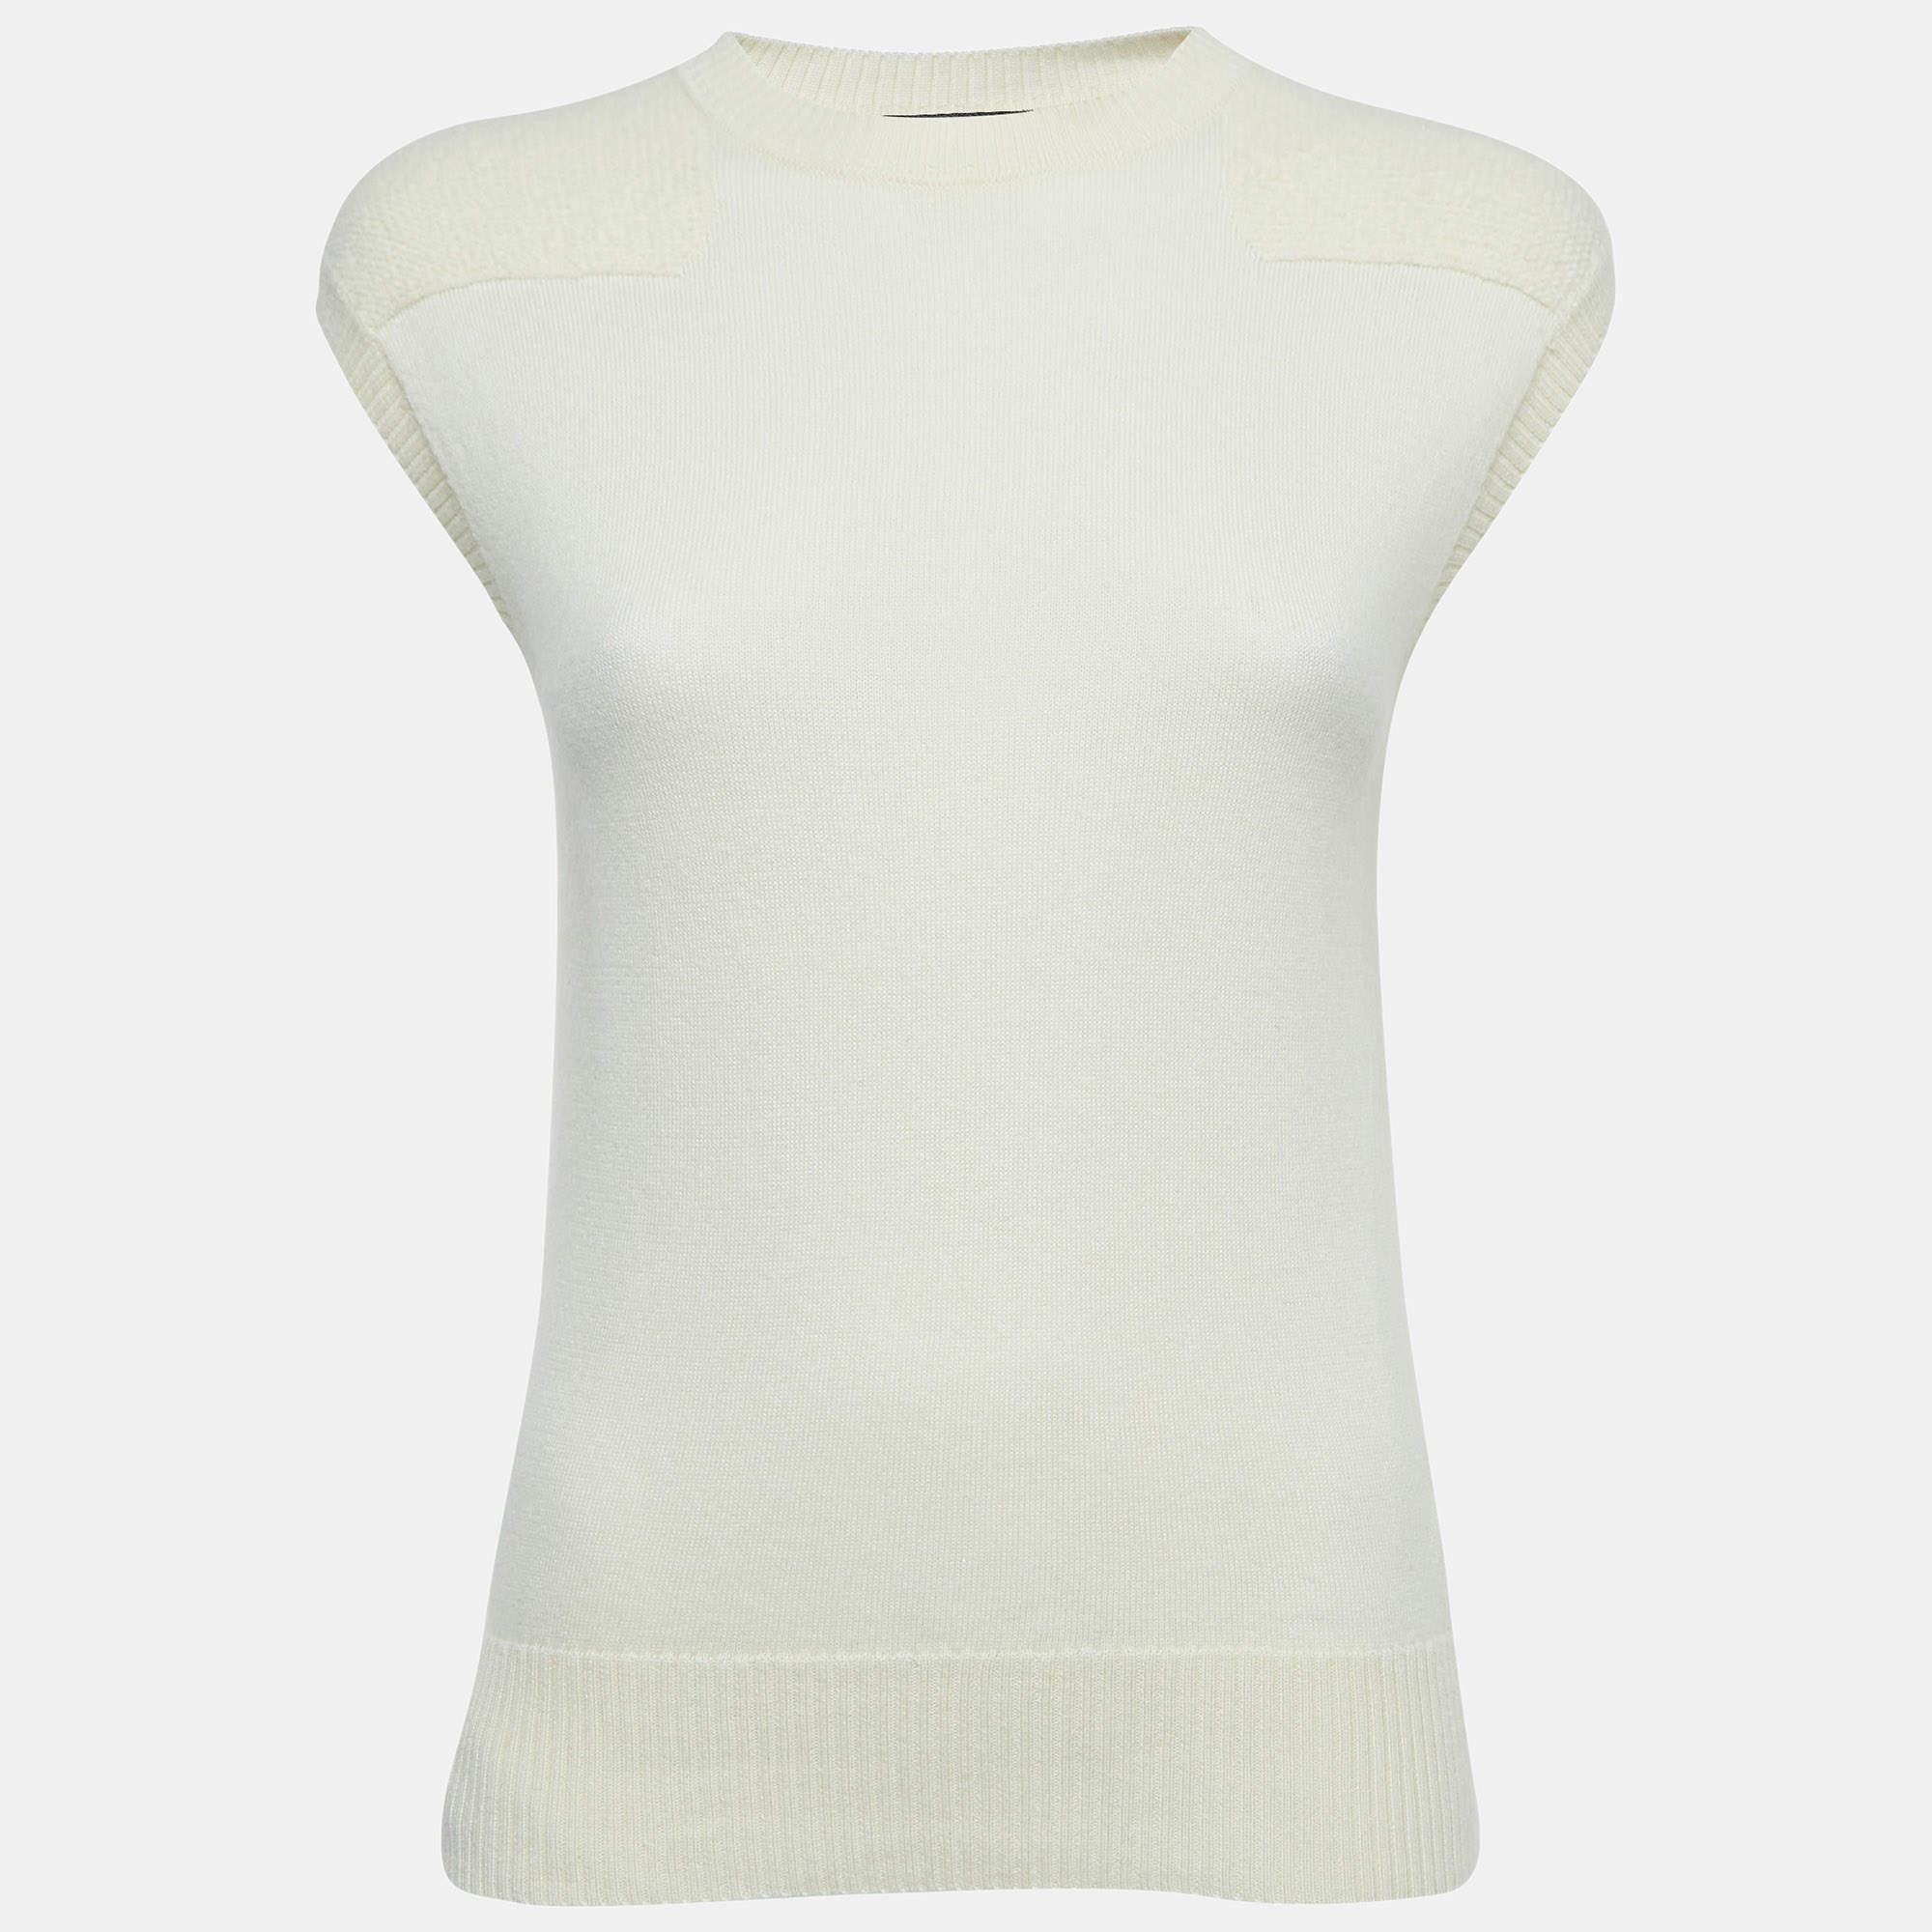 This Loro Piana vest for women will offer comfort on any cold day. Knit using cashmere, it comes in an ivory-white hue for a beautiful look.

